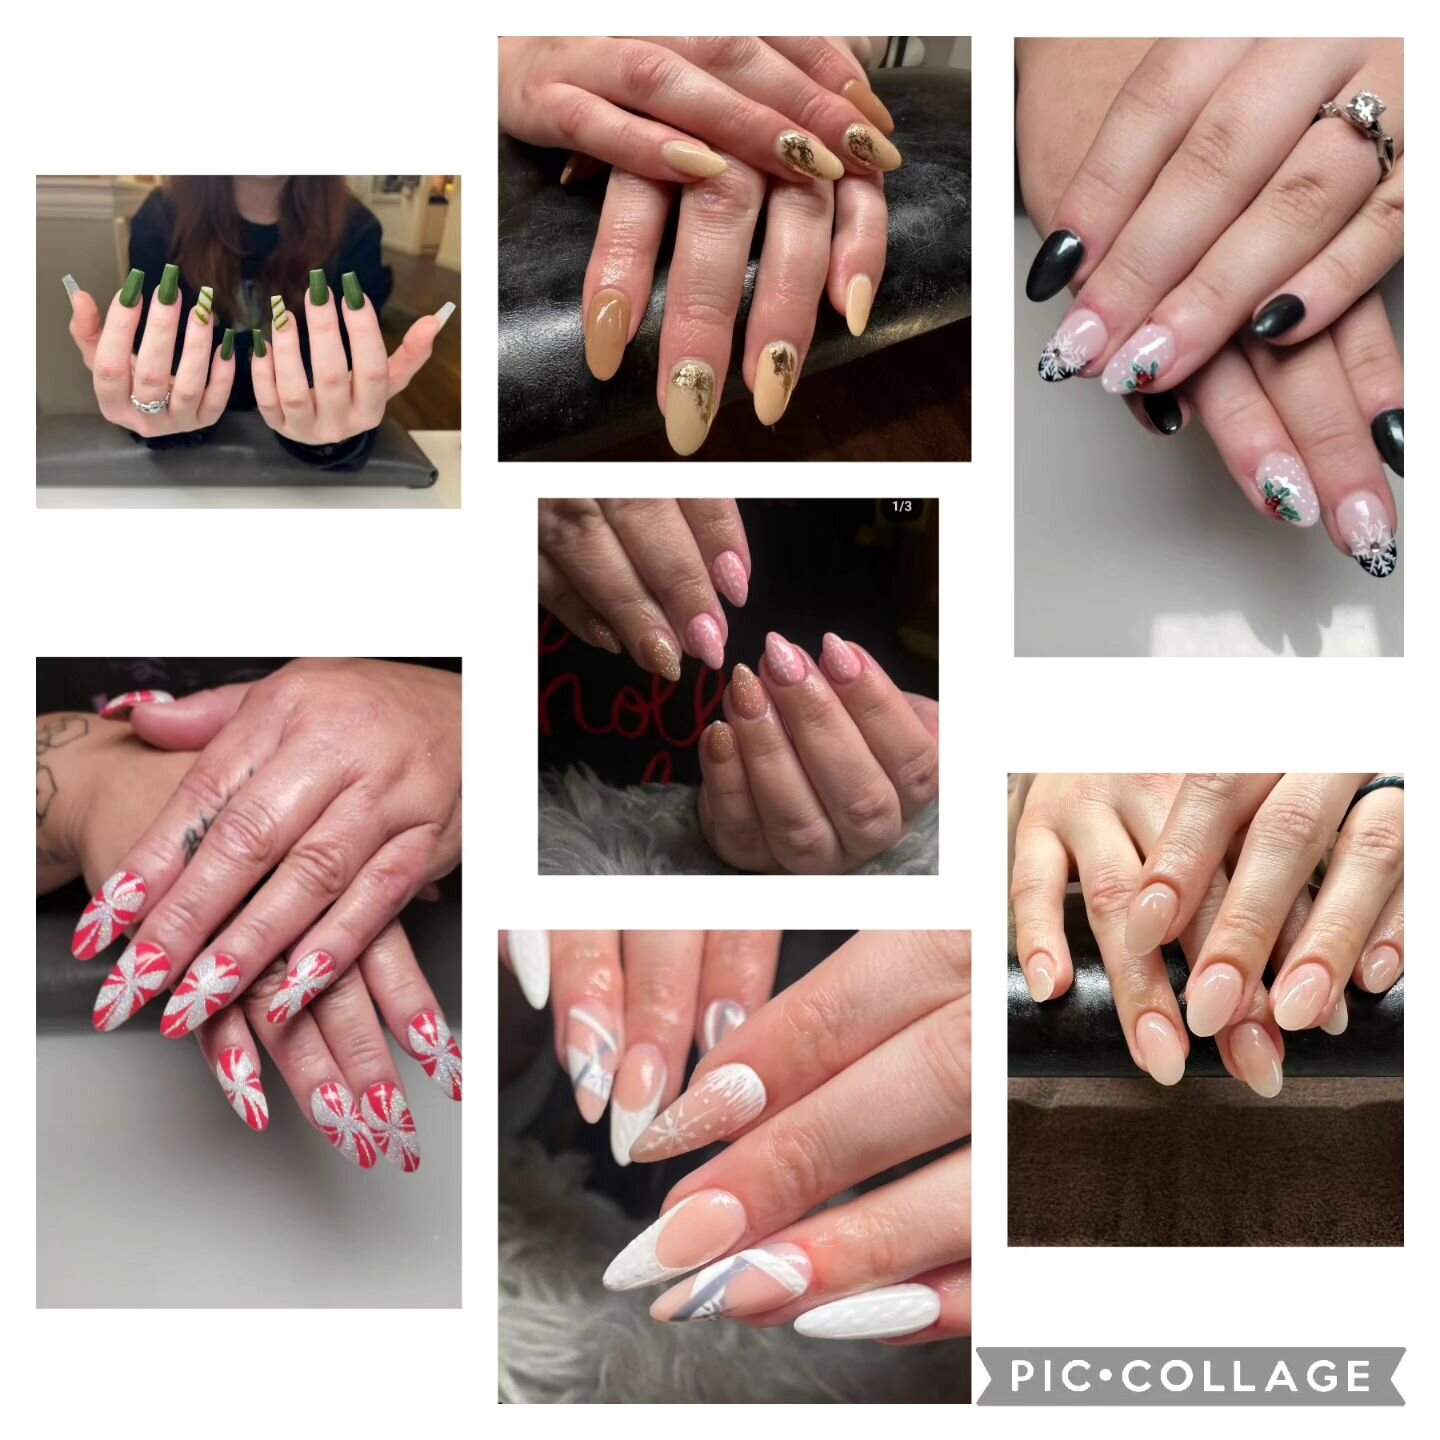 Hey everyone, the holidays are just around the corner. Please make sure to book your appointments ahead of time. Appointments are filling up fast. Choose any of our nail technicians. They're all great at what they do! Book online @ studionailsbayview